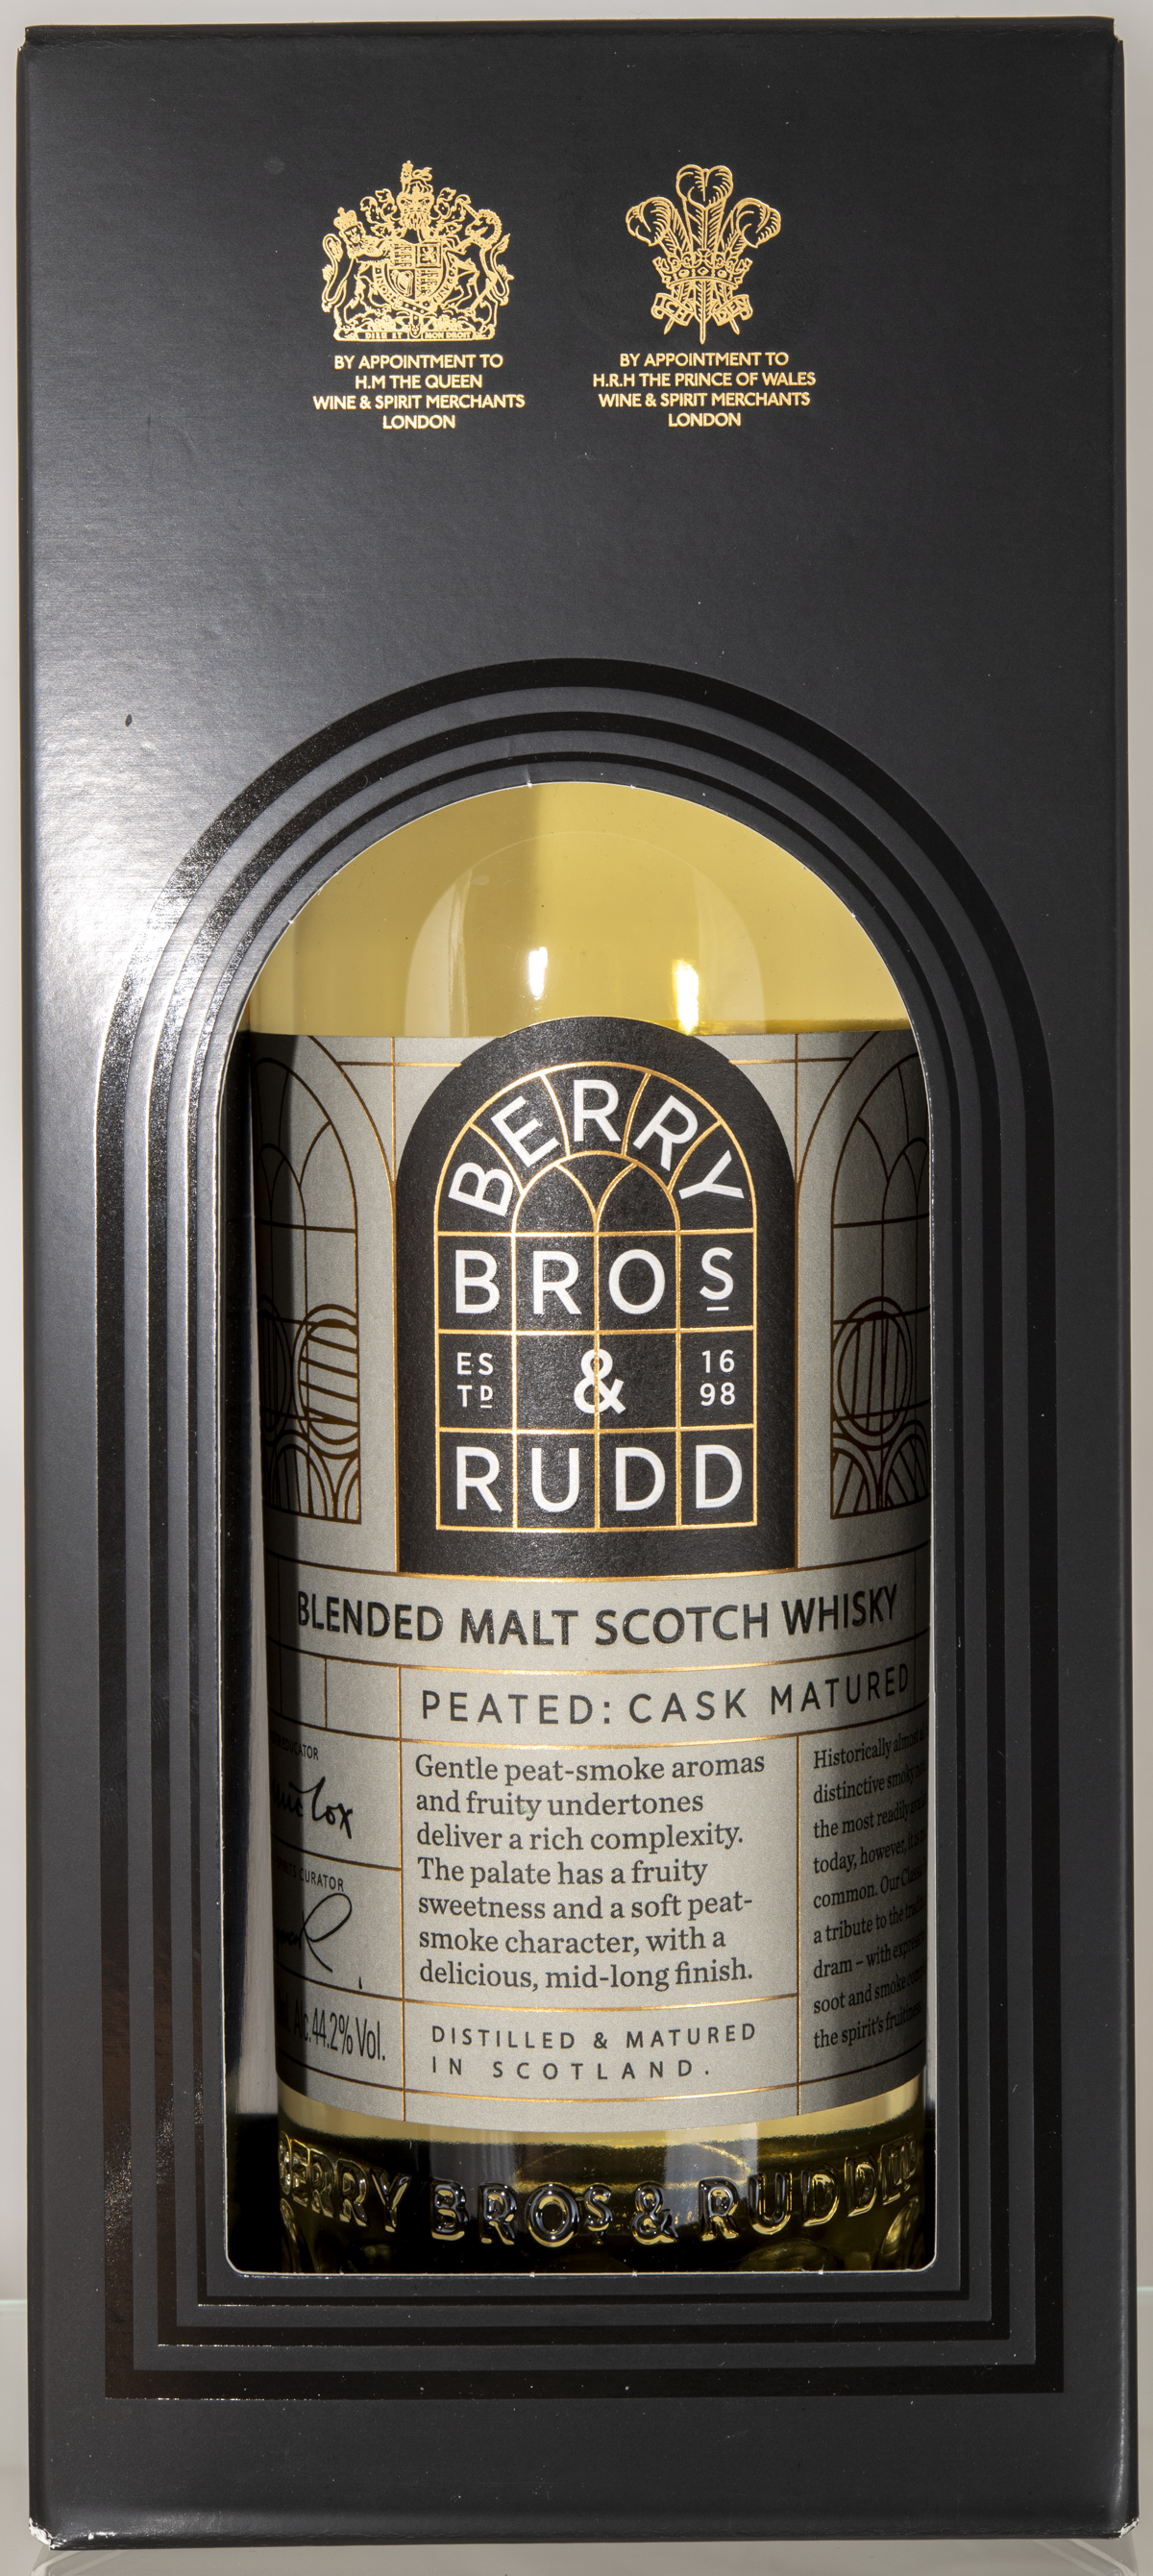 Billede: D85_8298 - Berry Bros and Rudd - Peated Cask Matured - box front.jpg